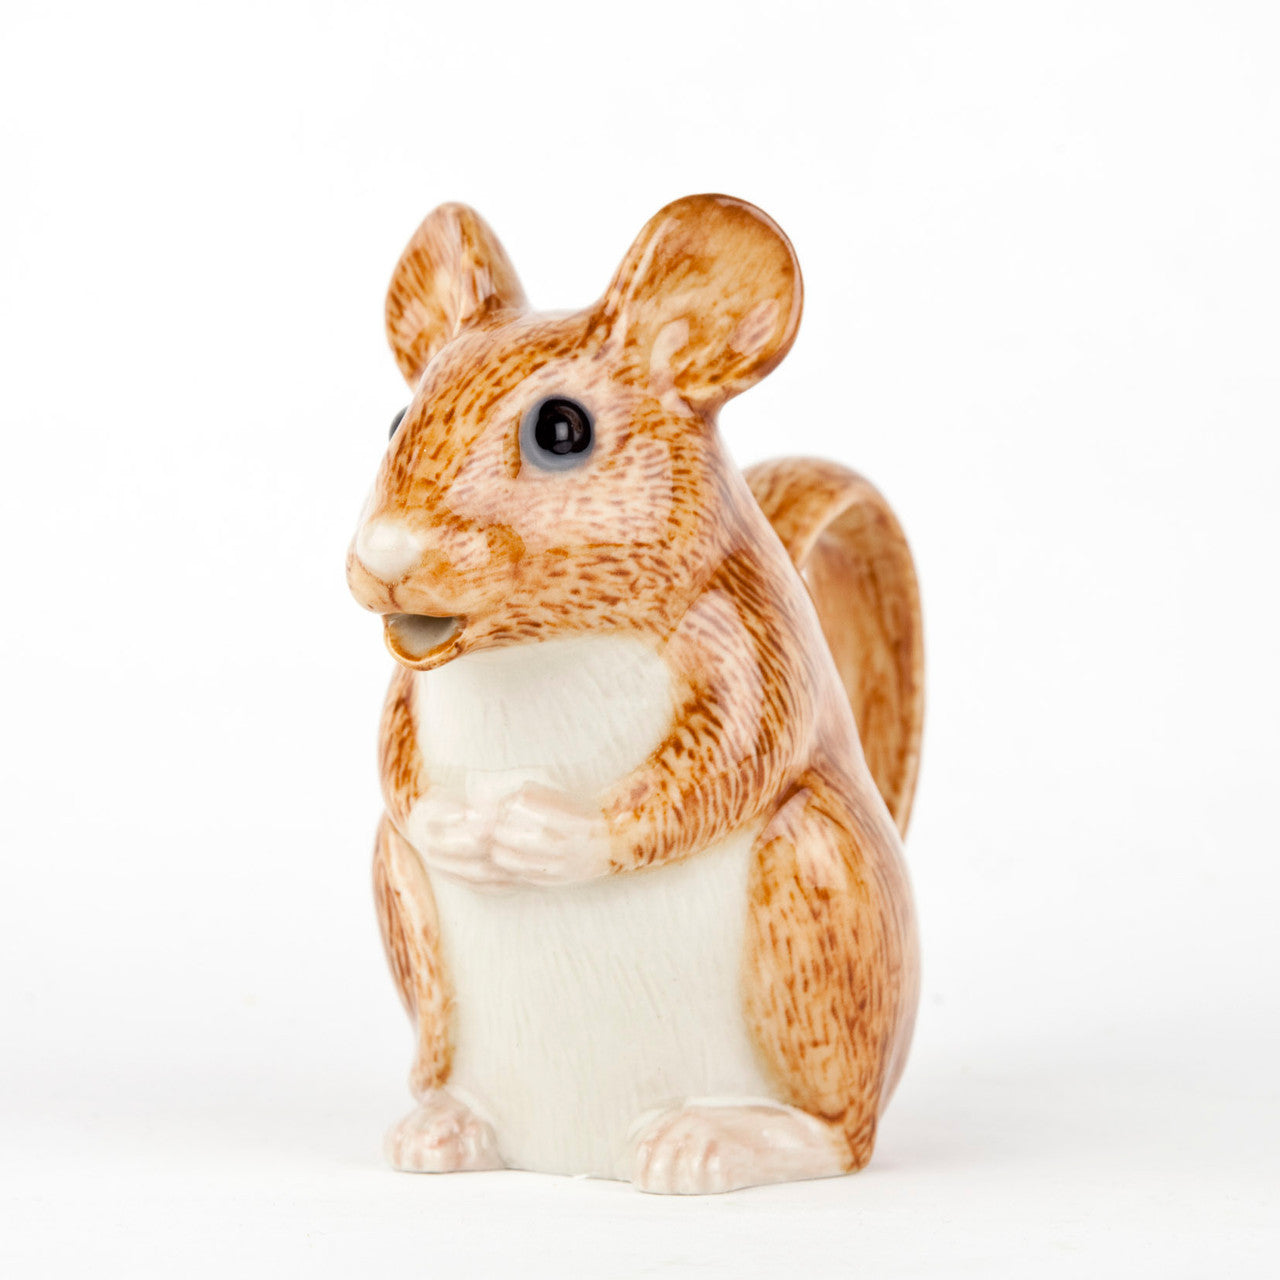 A small figurine of a Woodland Animal Jug sitting on a white background designed by Quail, a British brand known for their traditional British designs.